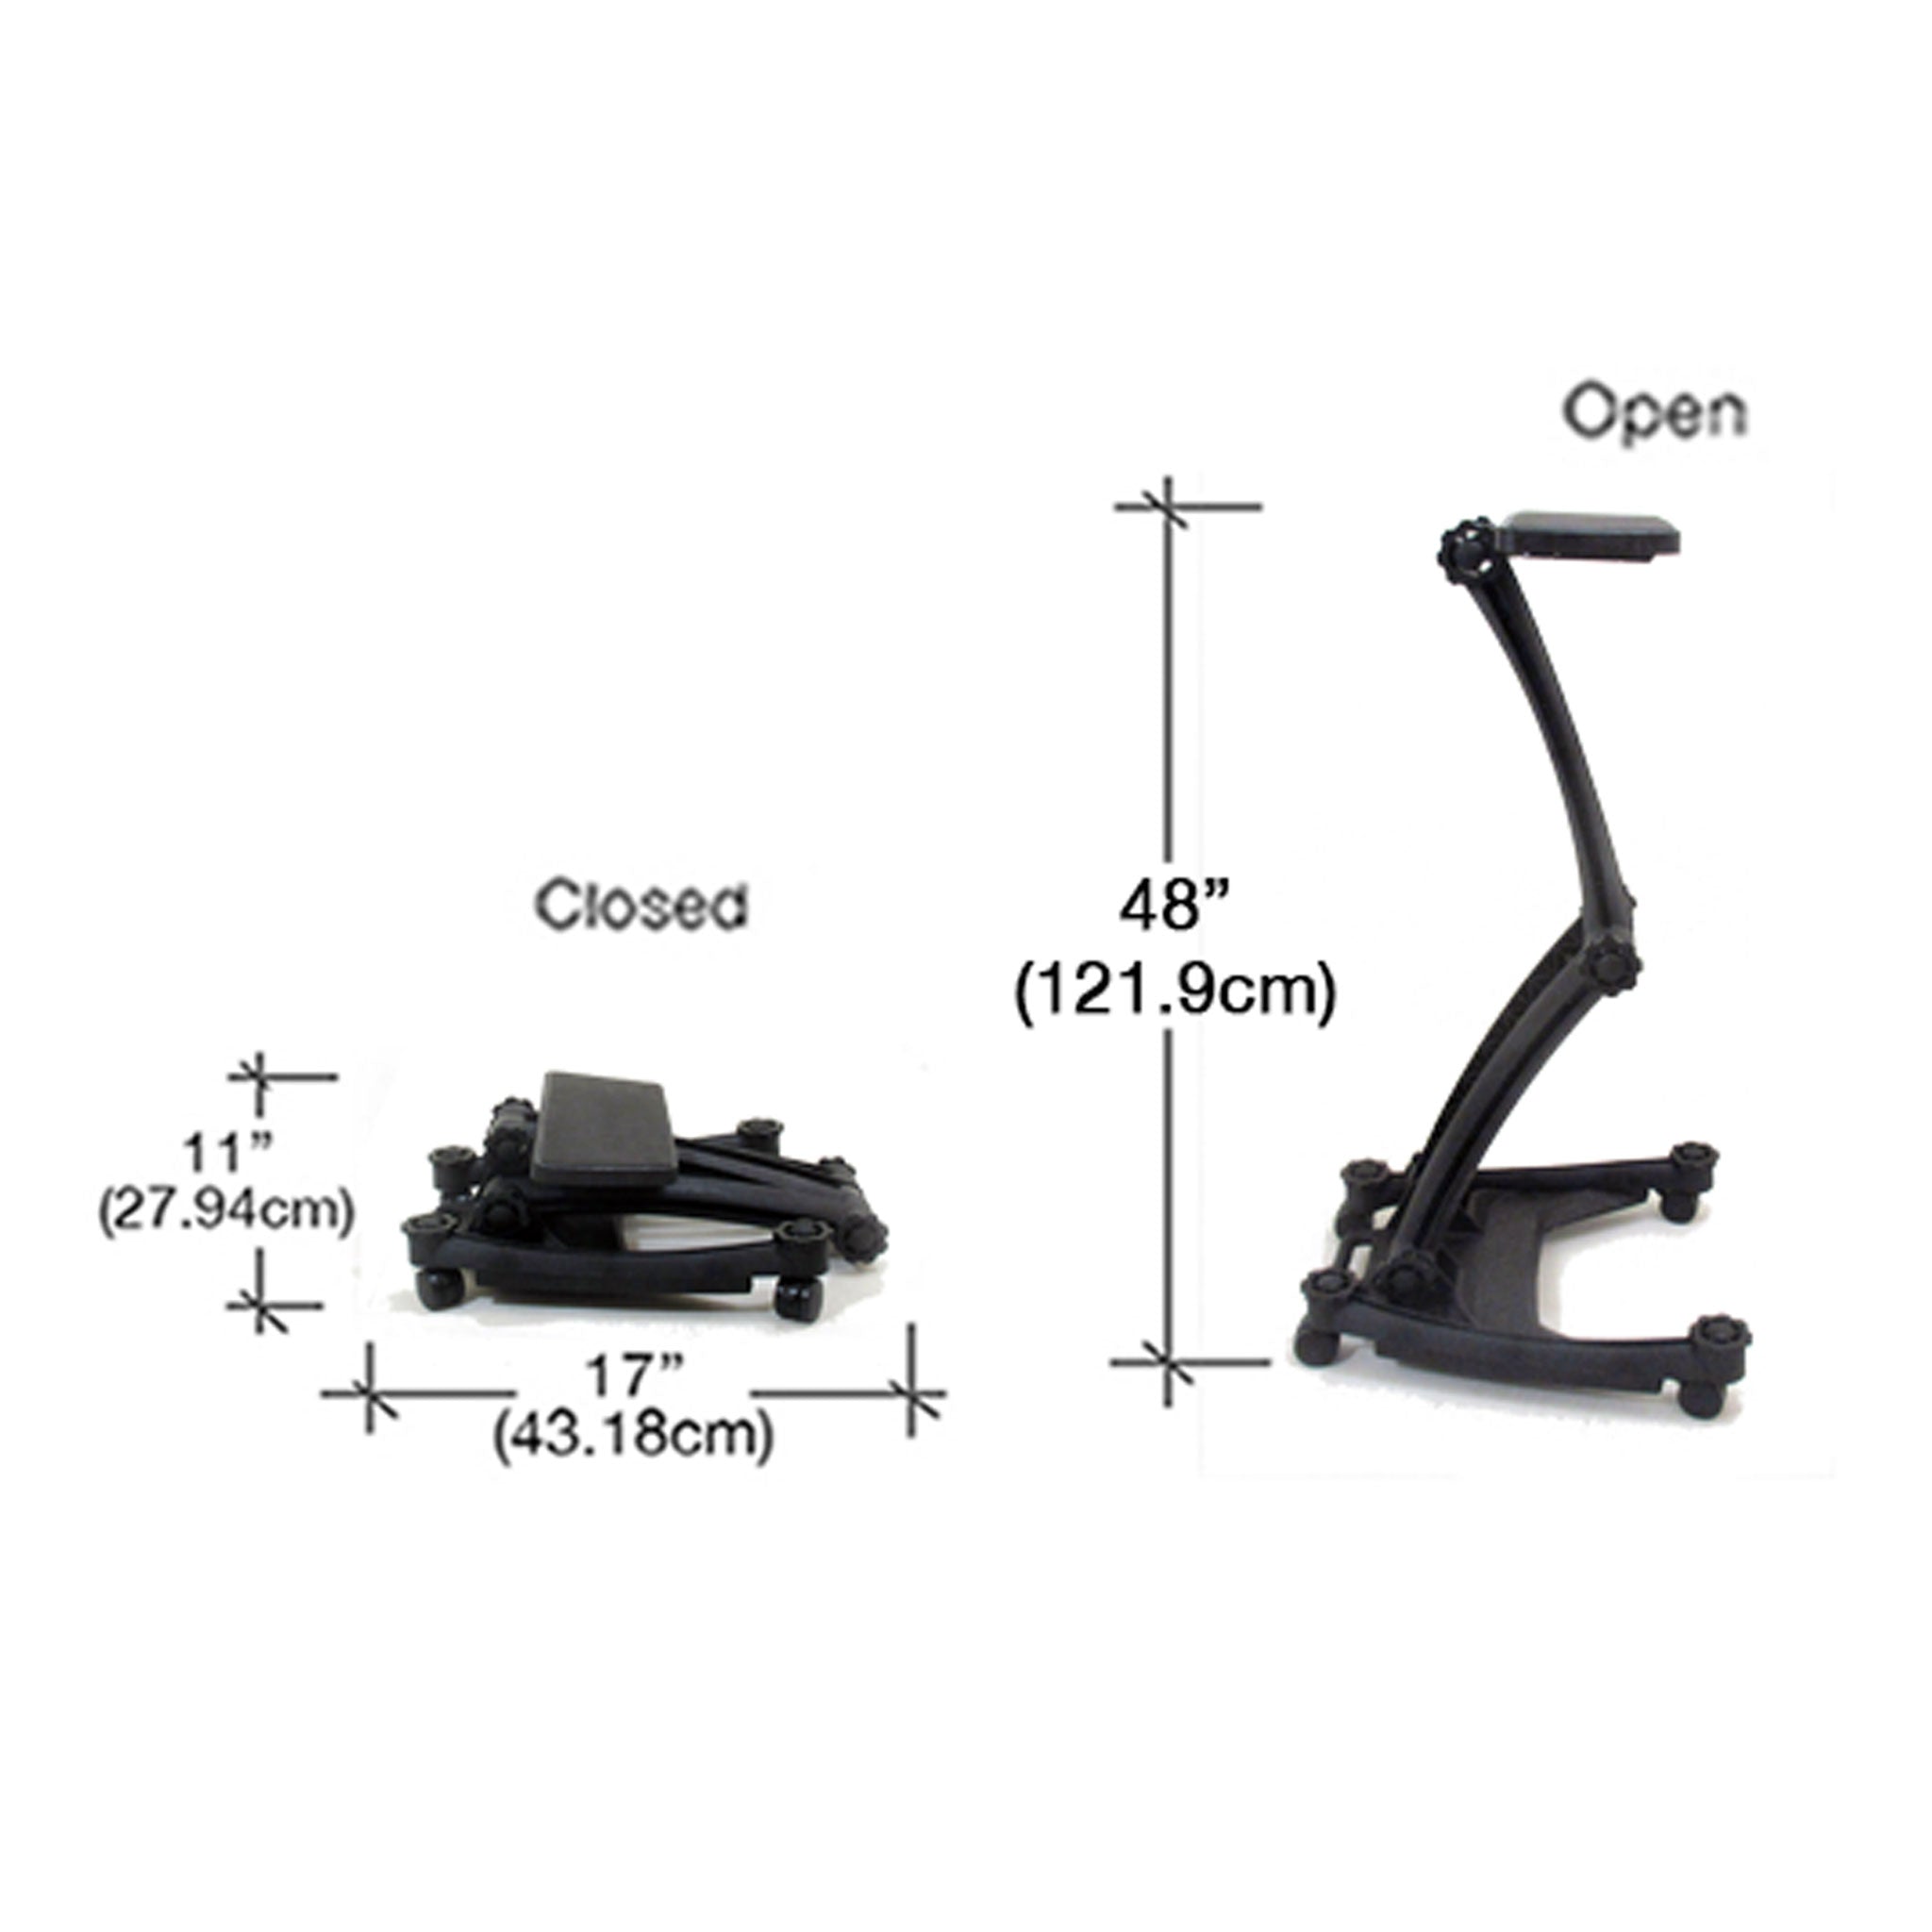 Dimensions of the ZStand Sportster LT in its closed and full extension positions.